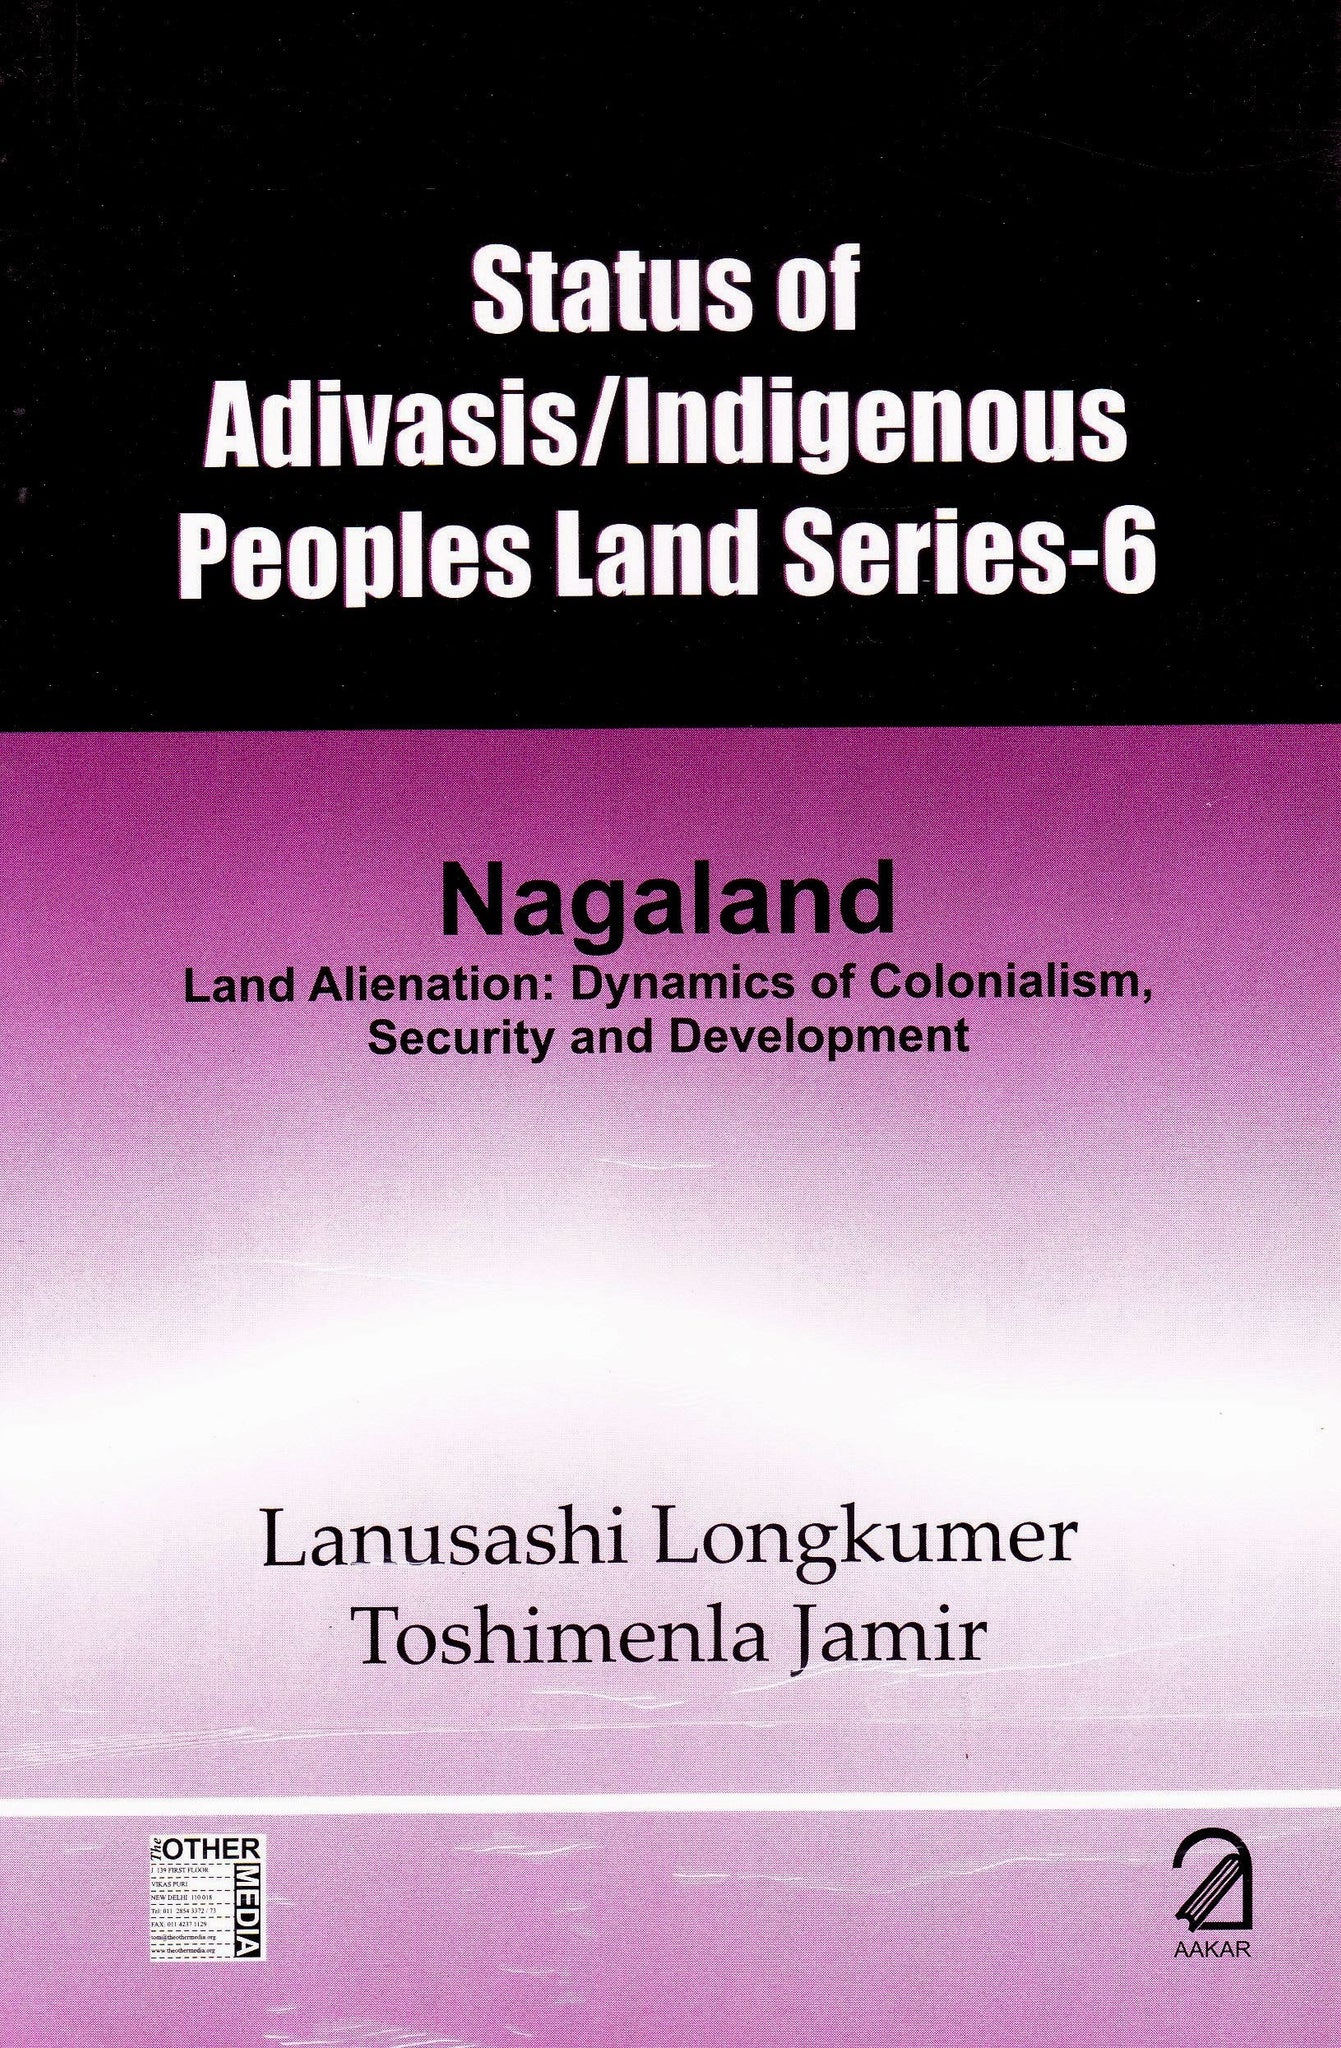 Status of Adivasis/Indigenous Peoples Land Series-6: Nagaland - Land Alienation: Dynamics of Colonialism, Security and Development